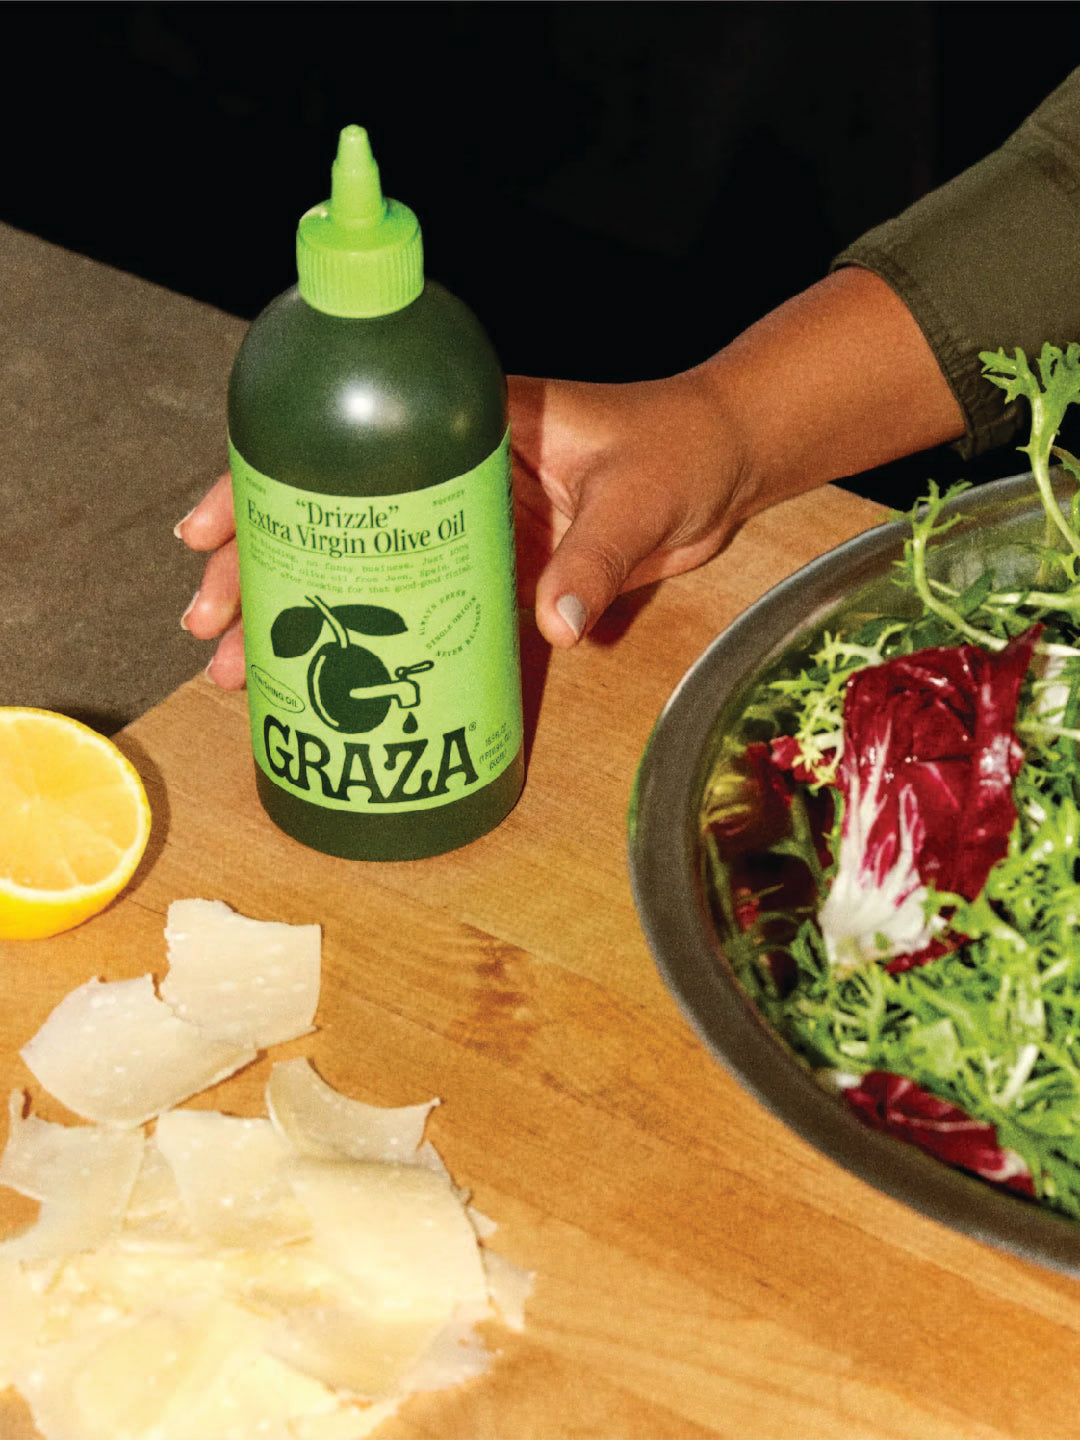 "Drizzle" Extra Virgin Olive Oil by Graza